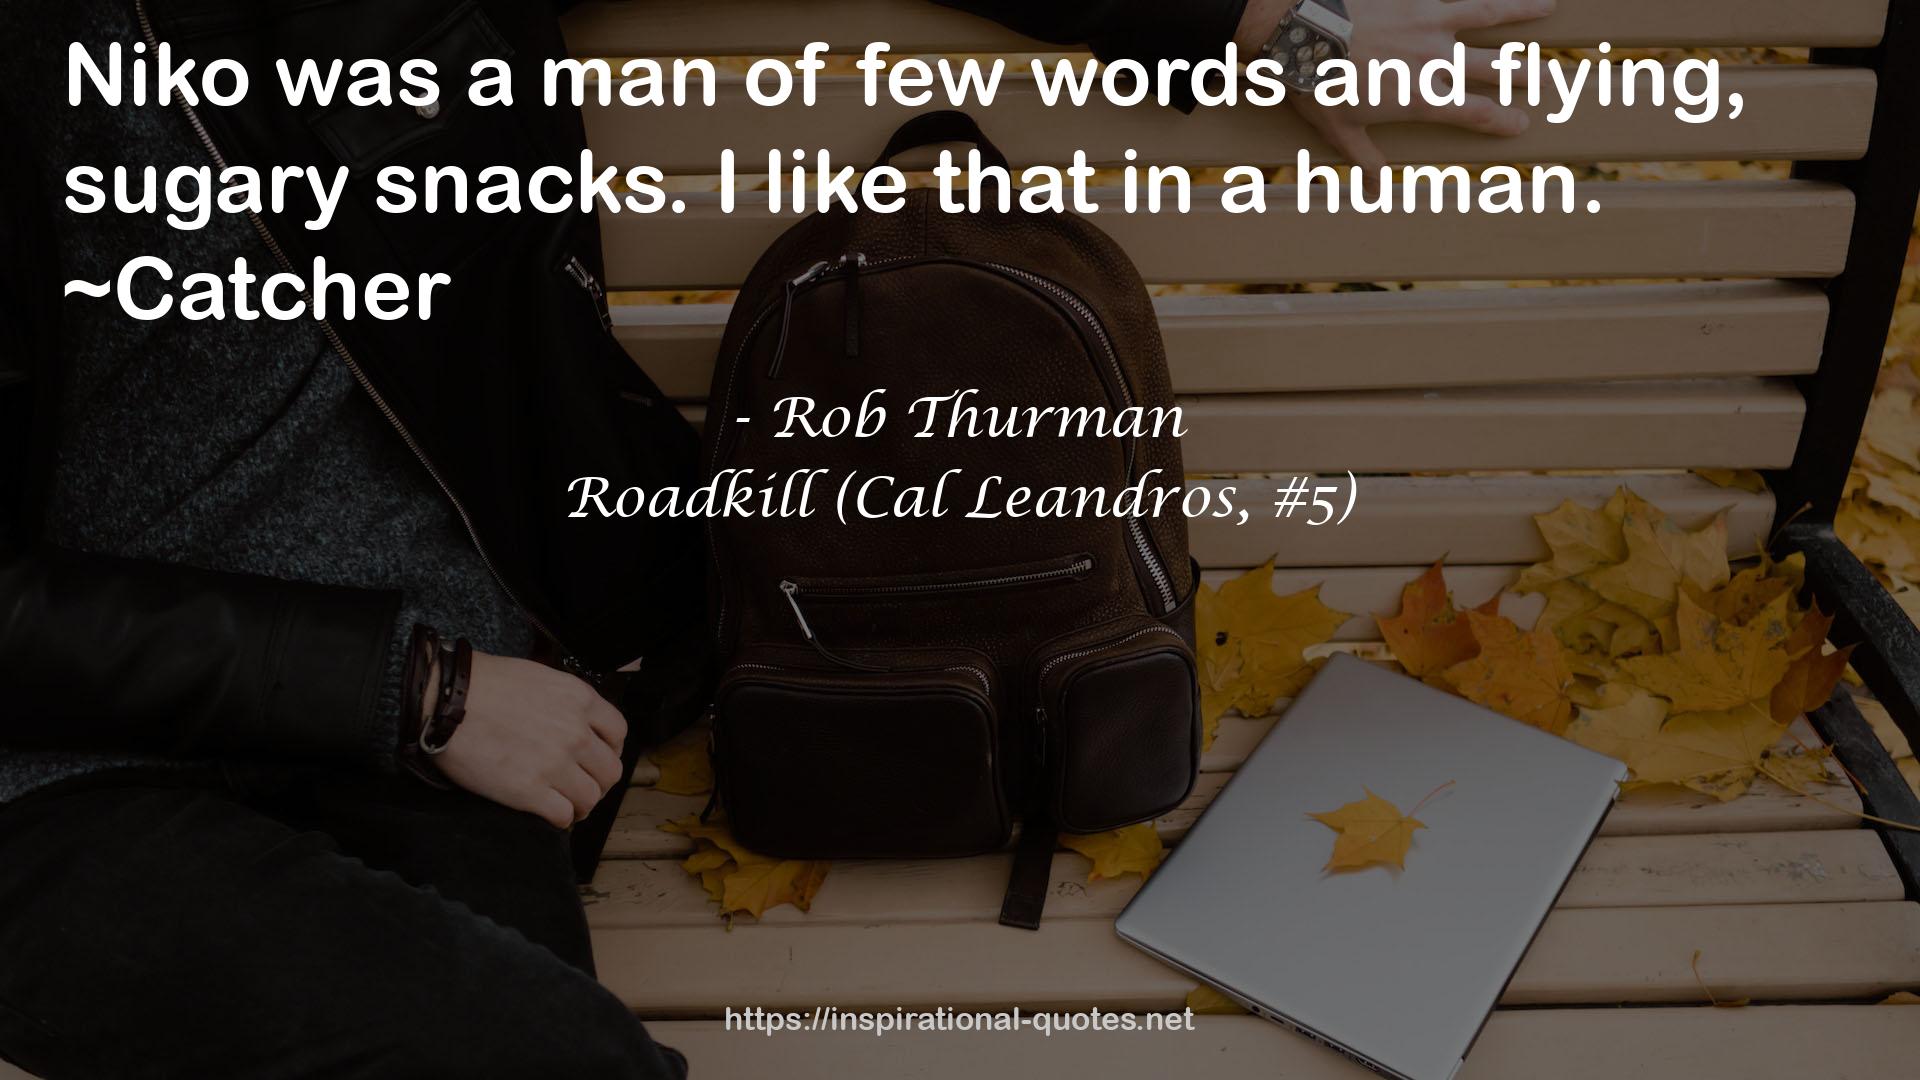 Roadkill (Cal Leandros, #5) QUOTES